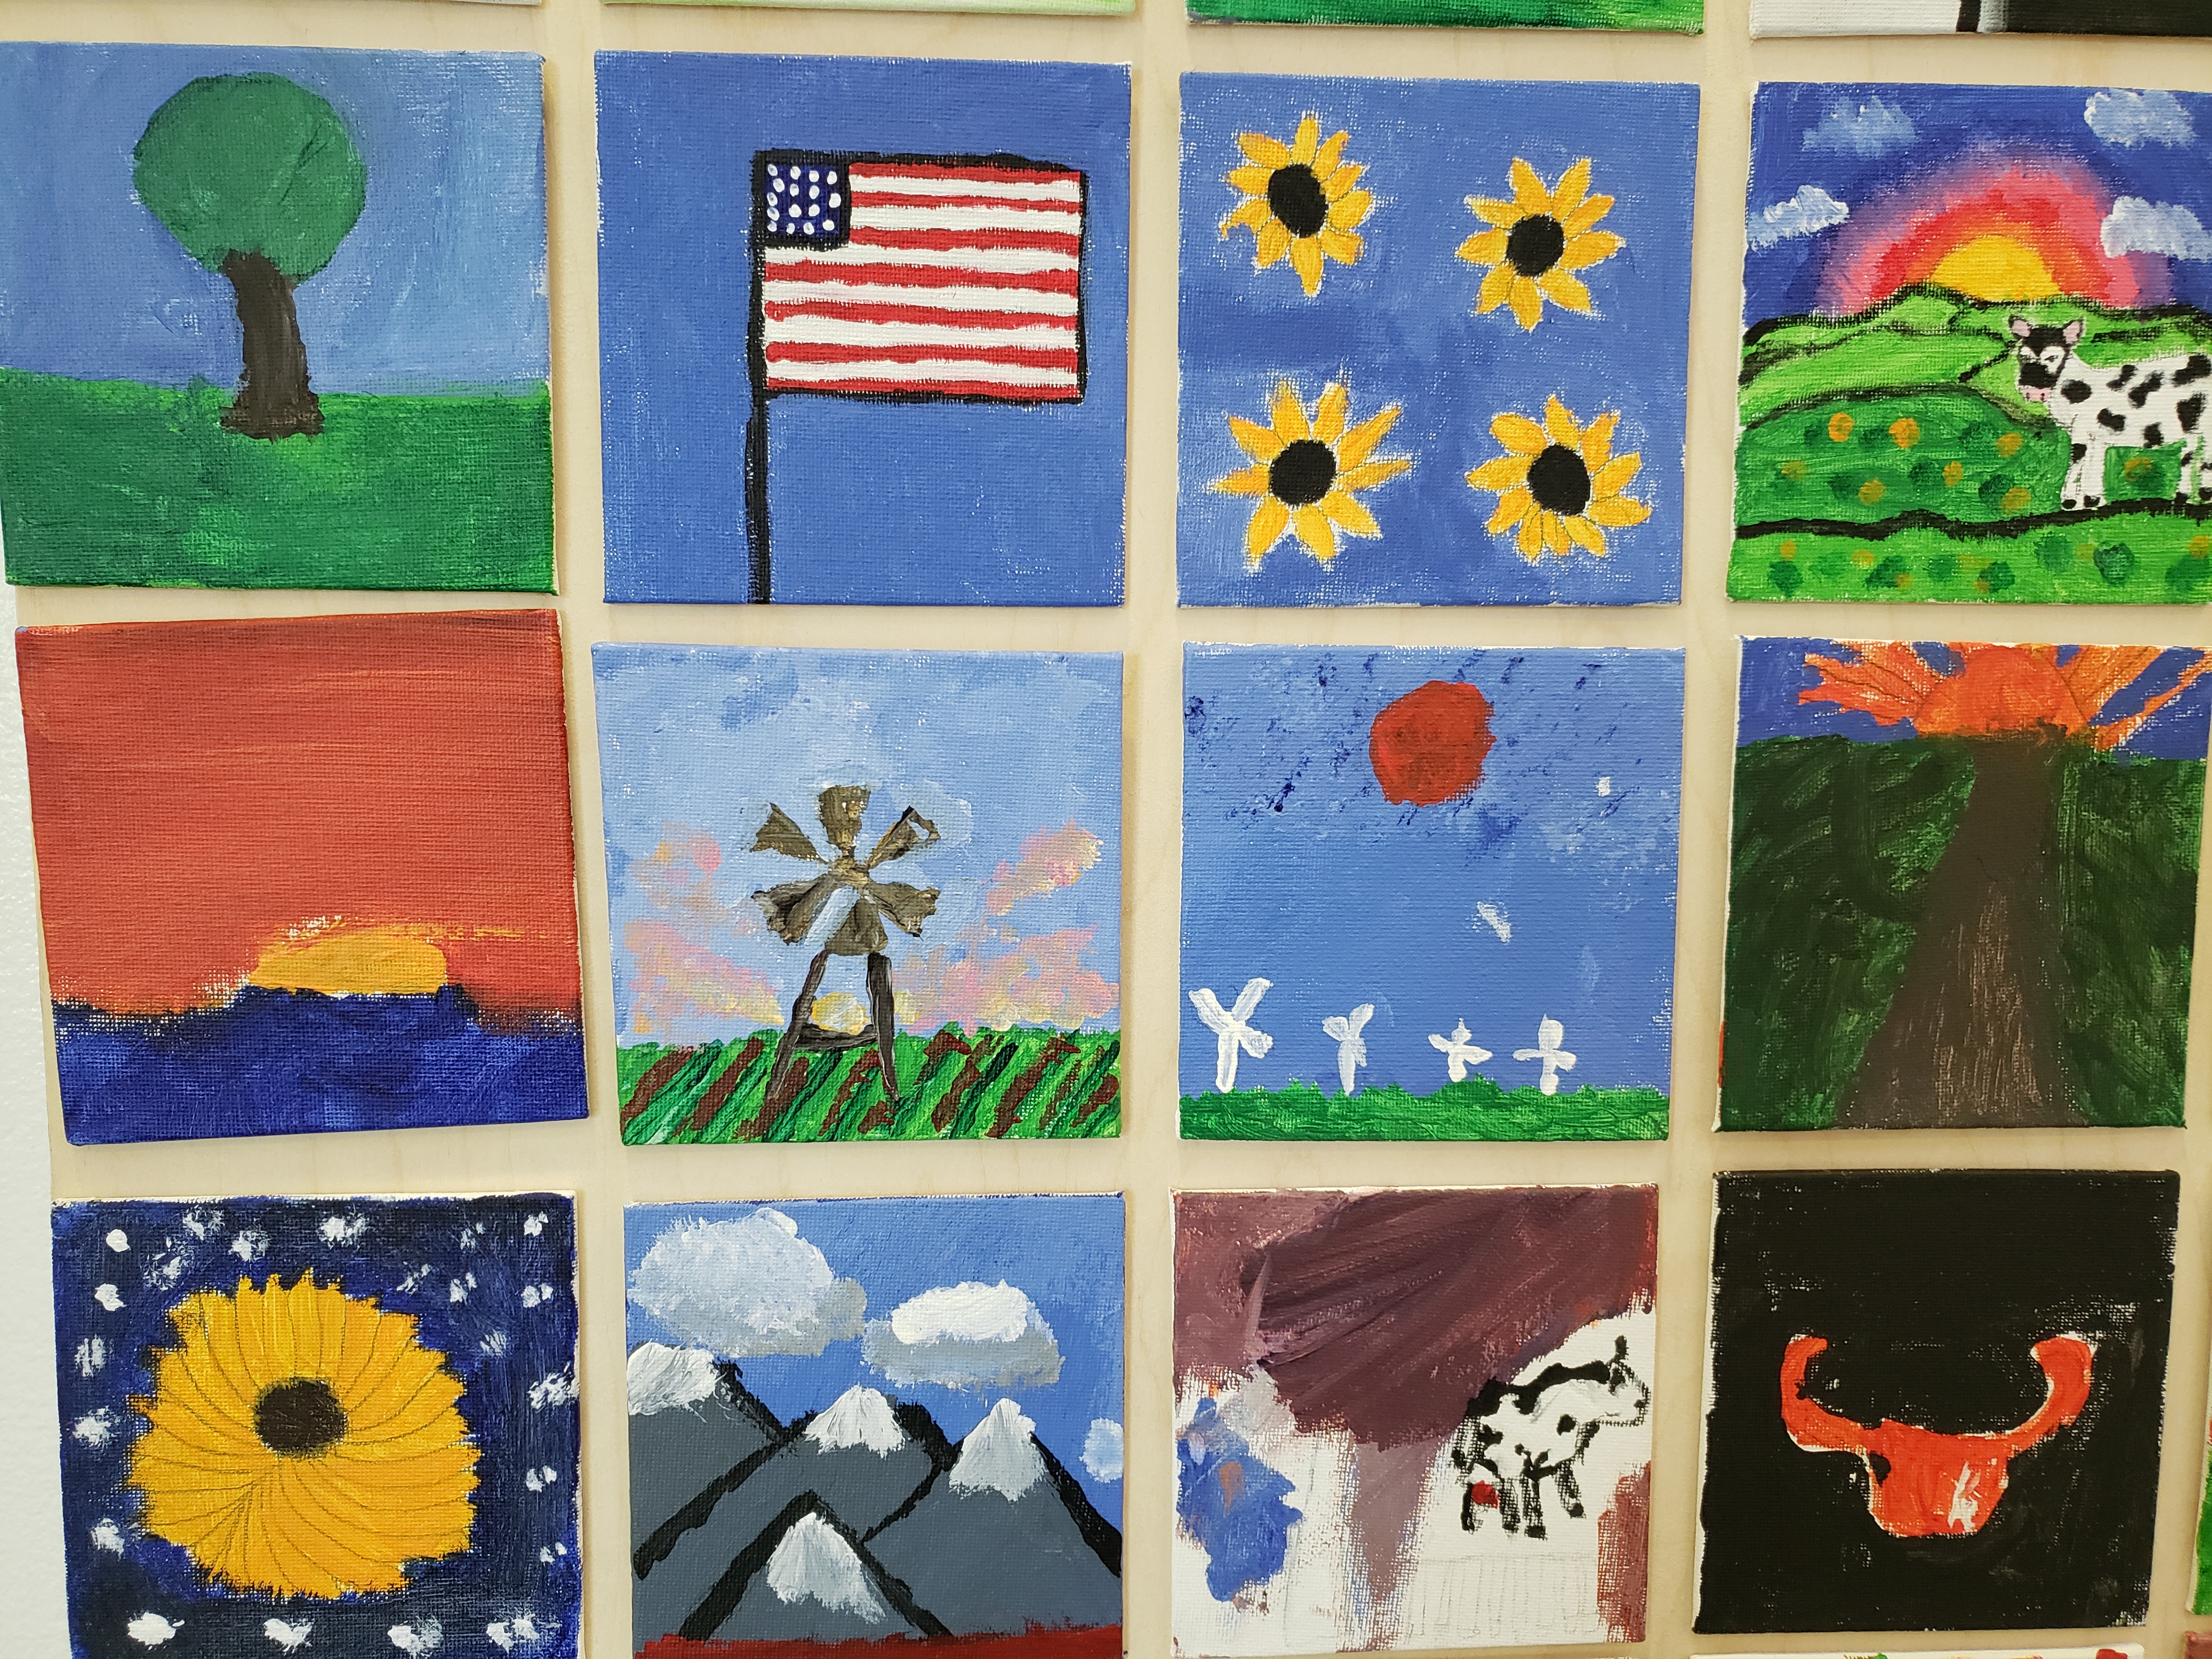 mini-canvases painted by Greensburg community members on the topic of "rural life"